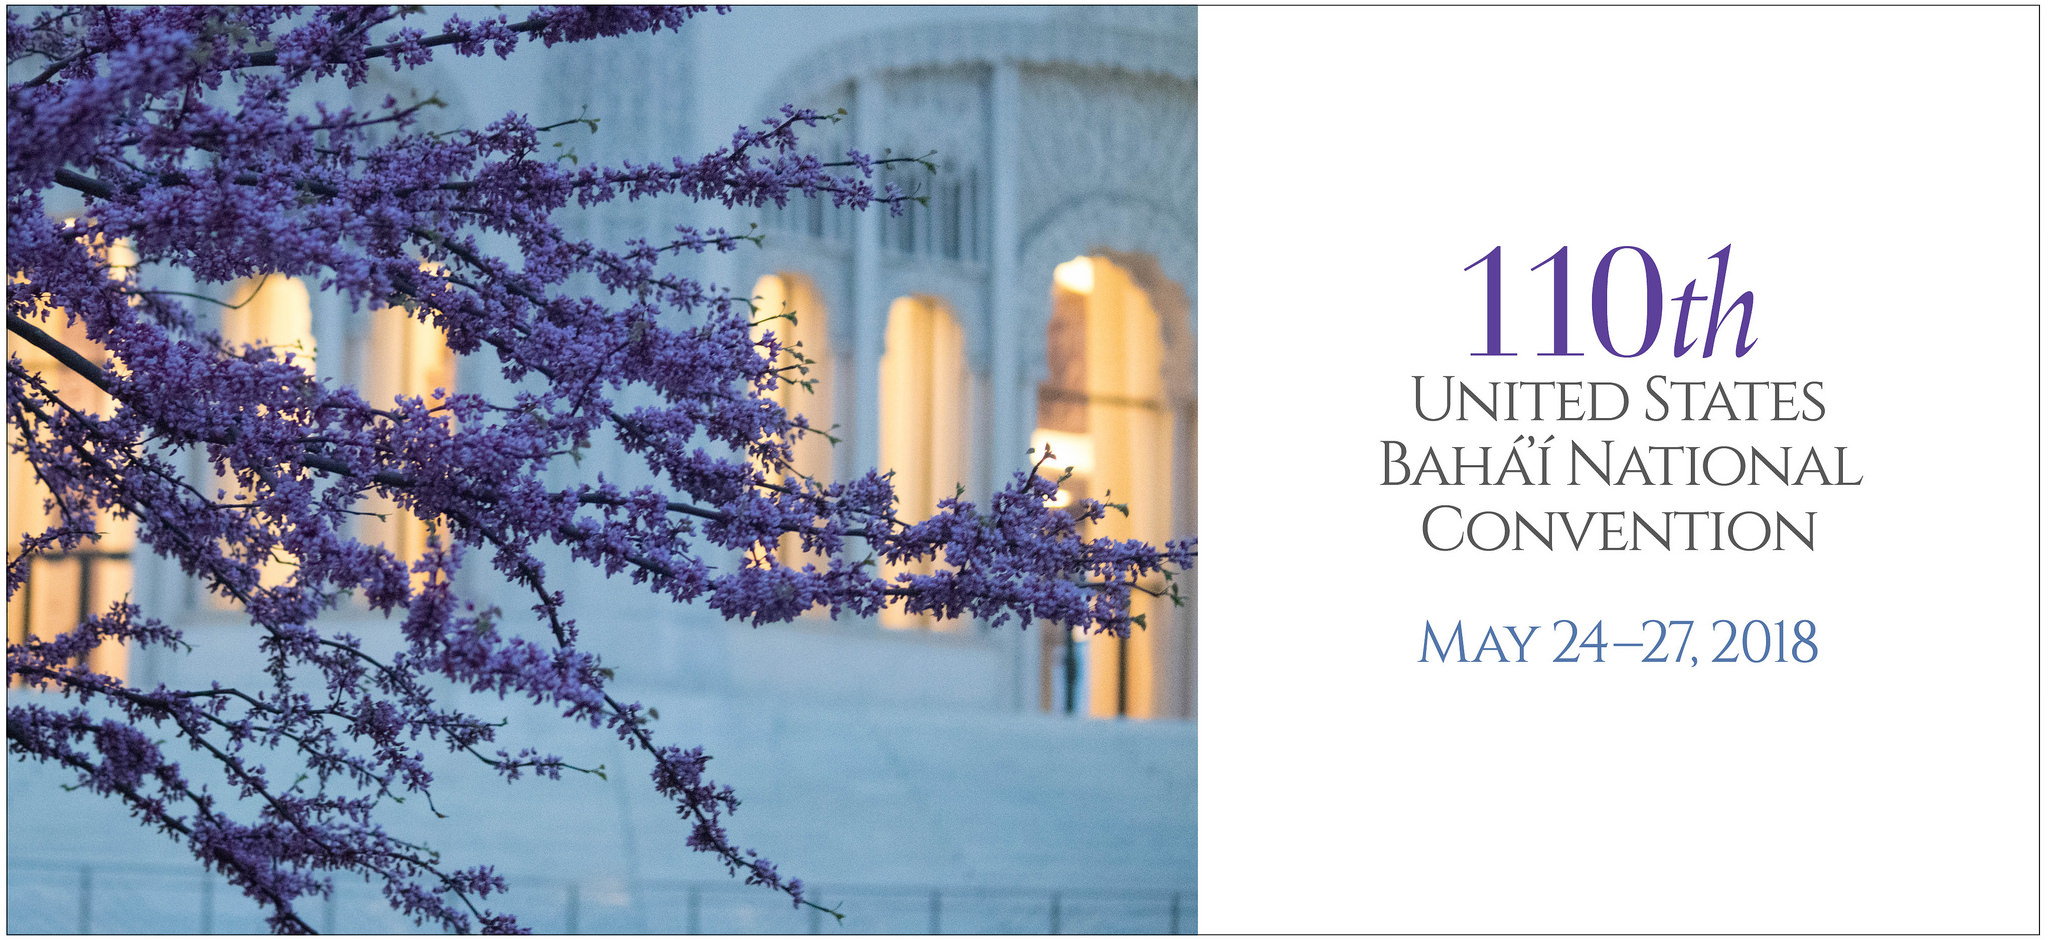 Delegates from across the United States gather for the 110th Annual Baha’i National Convention